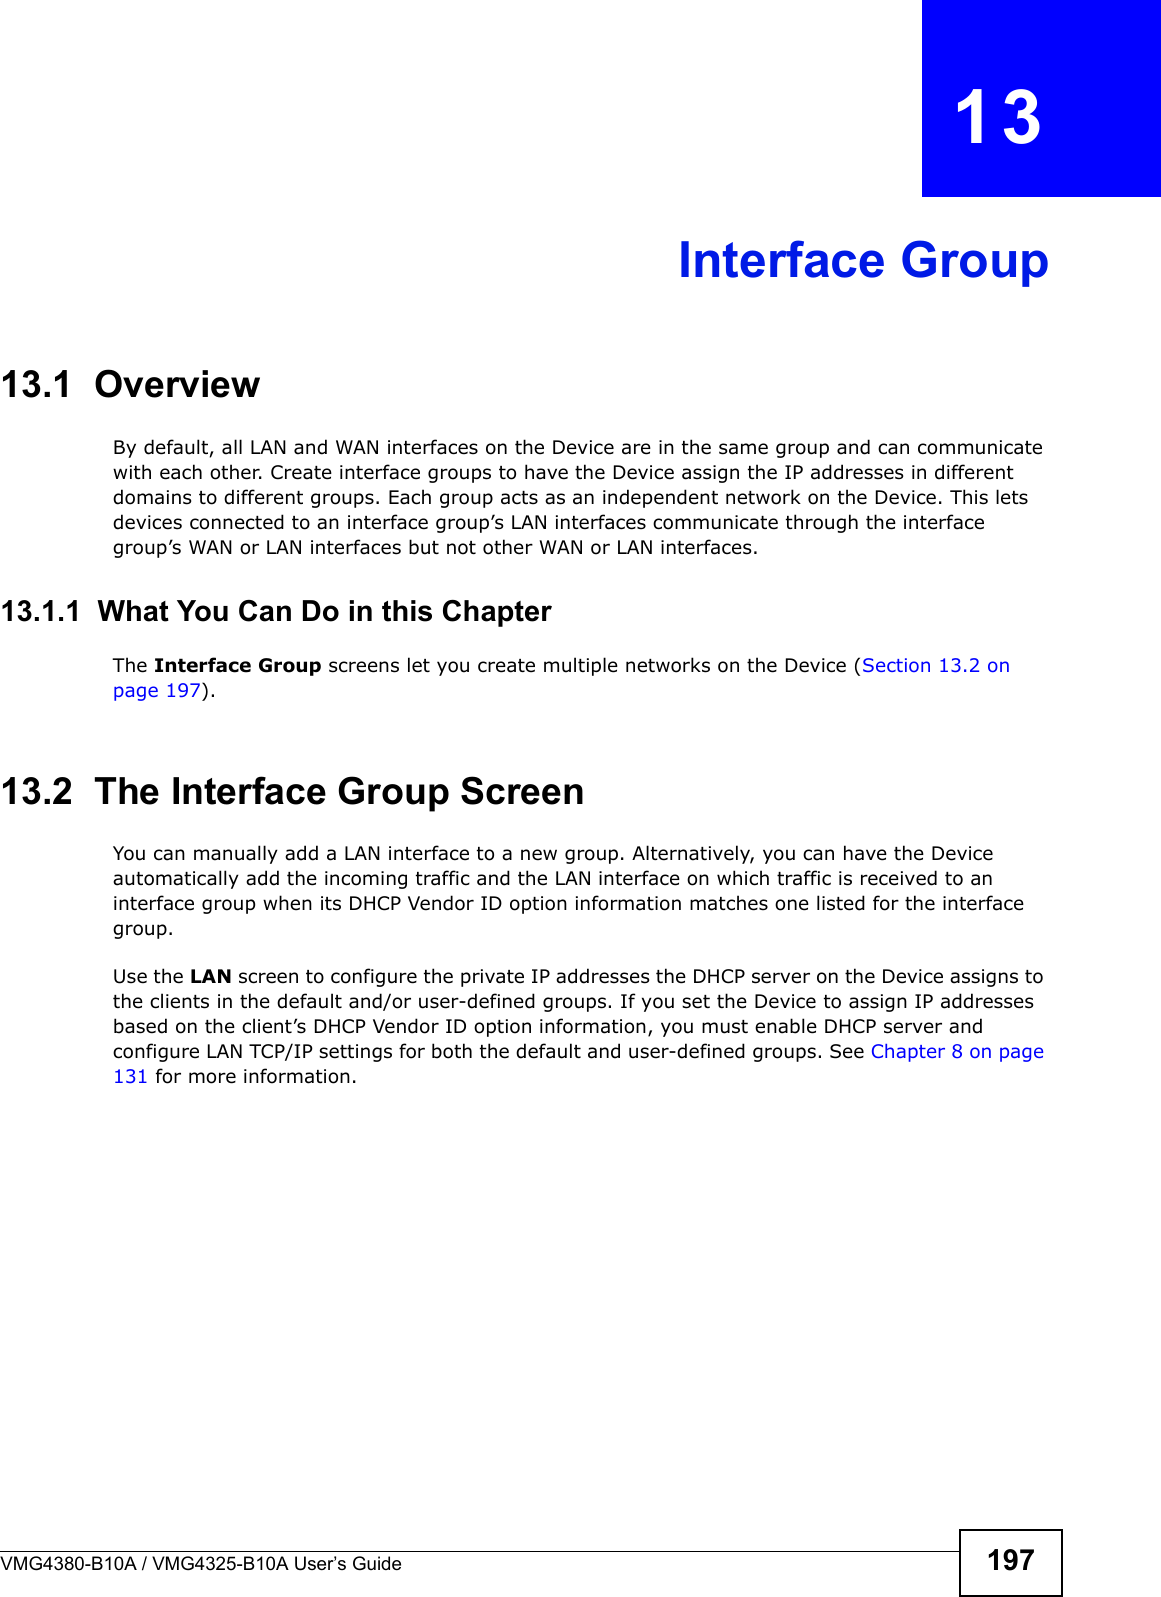 VMG4380-B10A / VMG4325-B10A User’s Guide 197CHAPTER  13Interface Group13.1  OverviewBy default, all LAN and WAN interfaces on the Device are in the same group and can communicate with each other. Create interface groups to have the Device assign the IP addresses in different domains to different groups. Each group acts as an independent network on the Device. This lets devices connected to an interface group’s LAN interfaces communicate through the interface group’s WAN or LAN interfaces but not other WAN or LAN interfaces.13.1.1  What You Can Do in this ChapterThe Interface Group screens let you create multiple networks on the Device (Section 13.2 on page 197).13.2  The Interface Group ScreenYou can manually add a LAN interface to a new group. Alternatively, you can have the Device automatically add the incoming traffic and the LAN interface on which traffic is received to an interface group when its DHCP Vendor ID option information matches one listed for the interface group.Use the LAN screen to configure the private IP addresses the DHCP server on the Device assigns to the clients in the default and/or user-defined groups. If you set the Device to assign IP addresses based on the client’s DHCP Vendor ID option information, you must enable DHCP server and configure LAN TCP/IP settings for both the default and user-defined groups. See Chapter 8 on page 131 for more information.